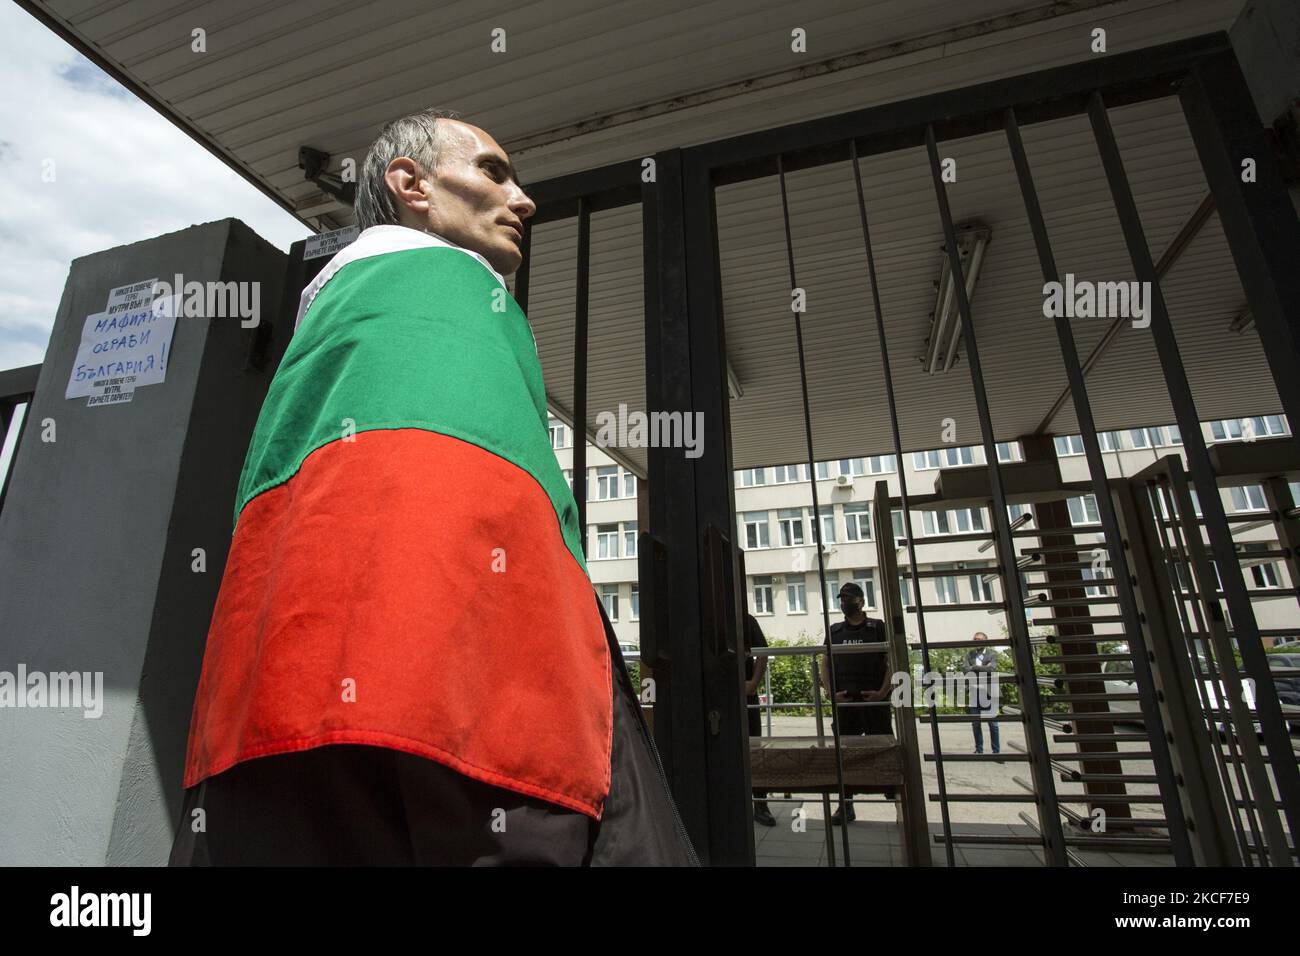 Protest in Sofia, Bulgaria on May 25, 2021 against the illegal wiretapping in front of the SANS (State Agency for National Security) building and blocking a boulevard in front of the building. (Photo by Hristo Vladev/NurPhoto) Stock Photo